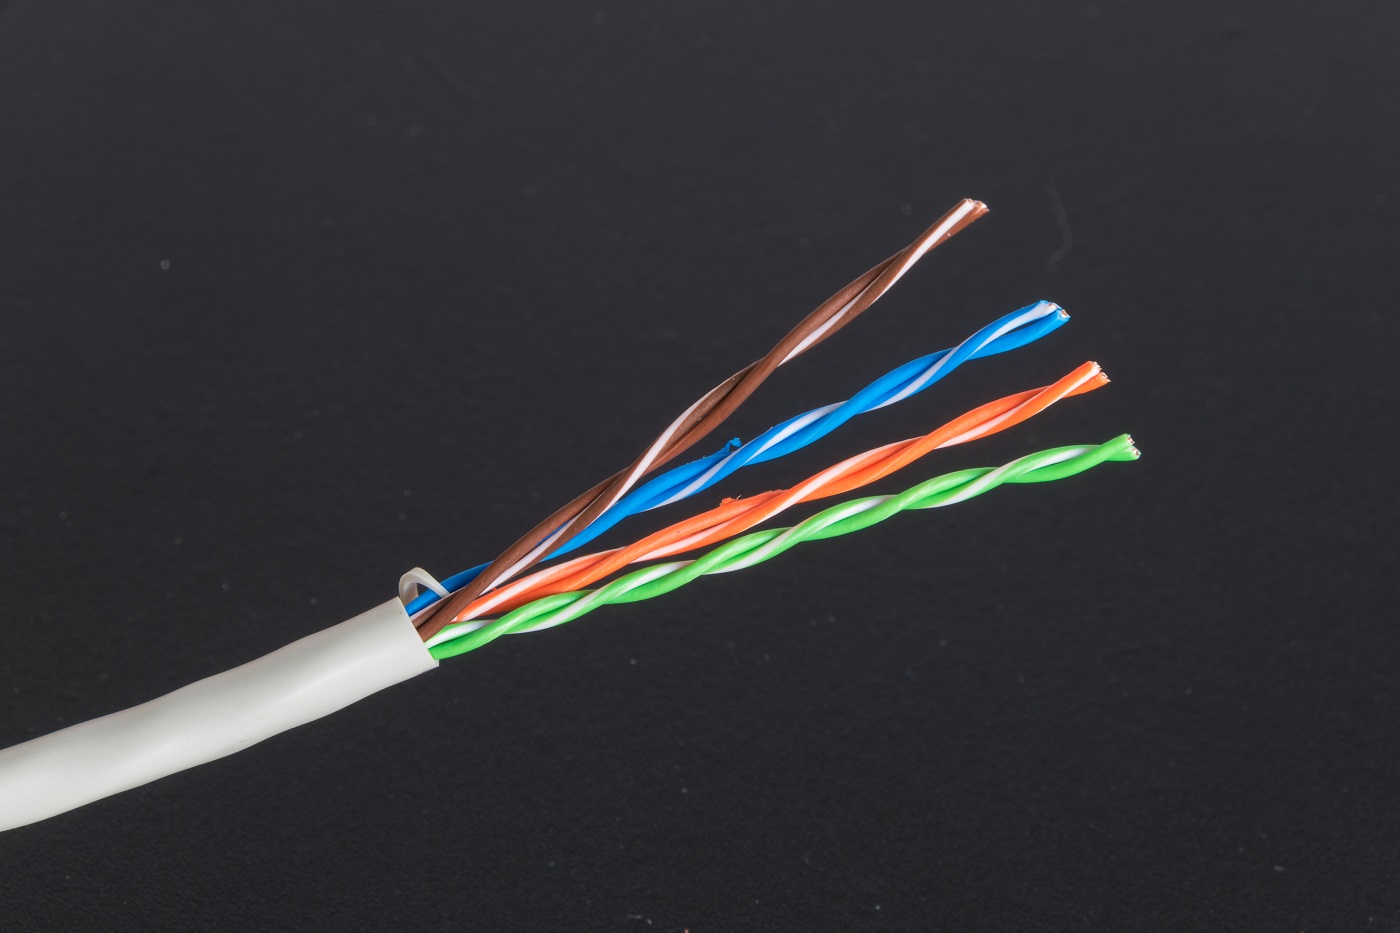 Network Connectivity with Twisted Pair Cables